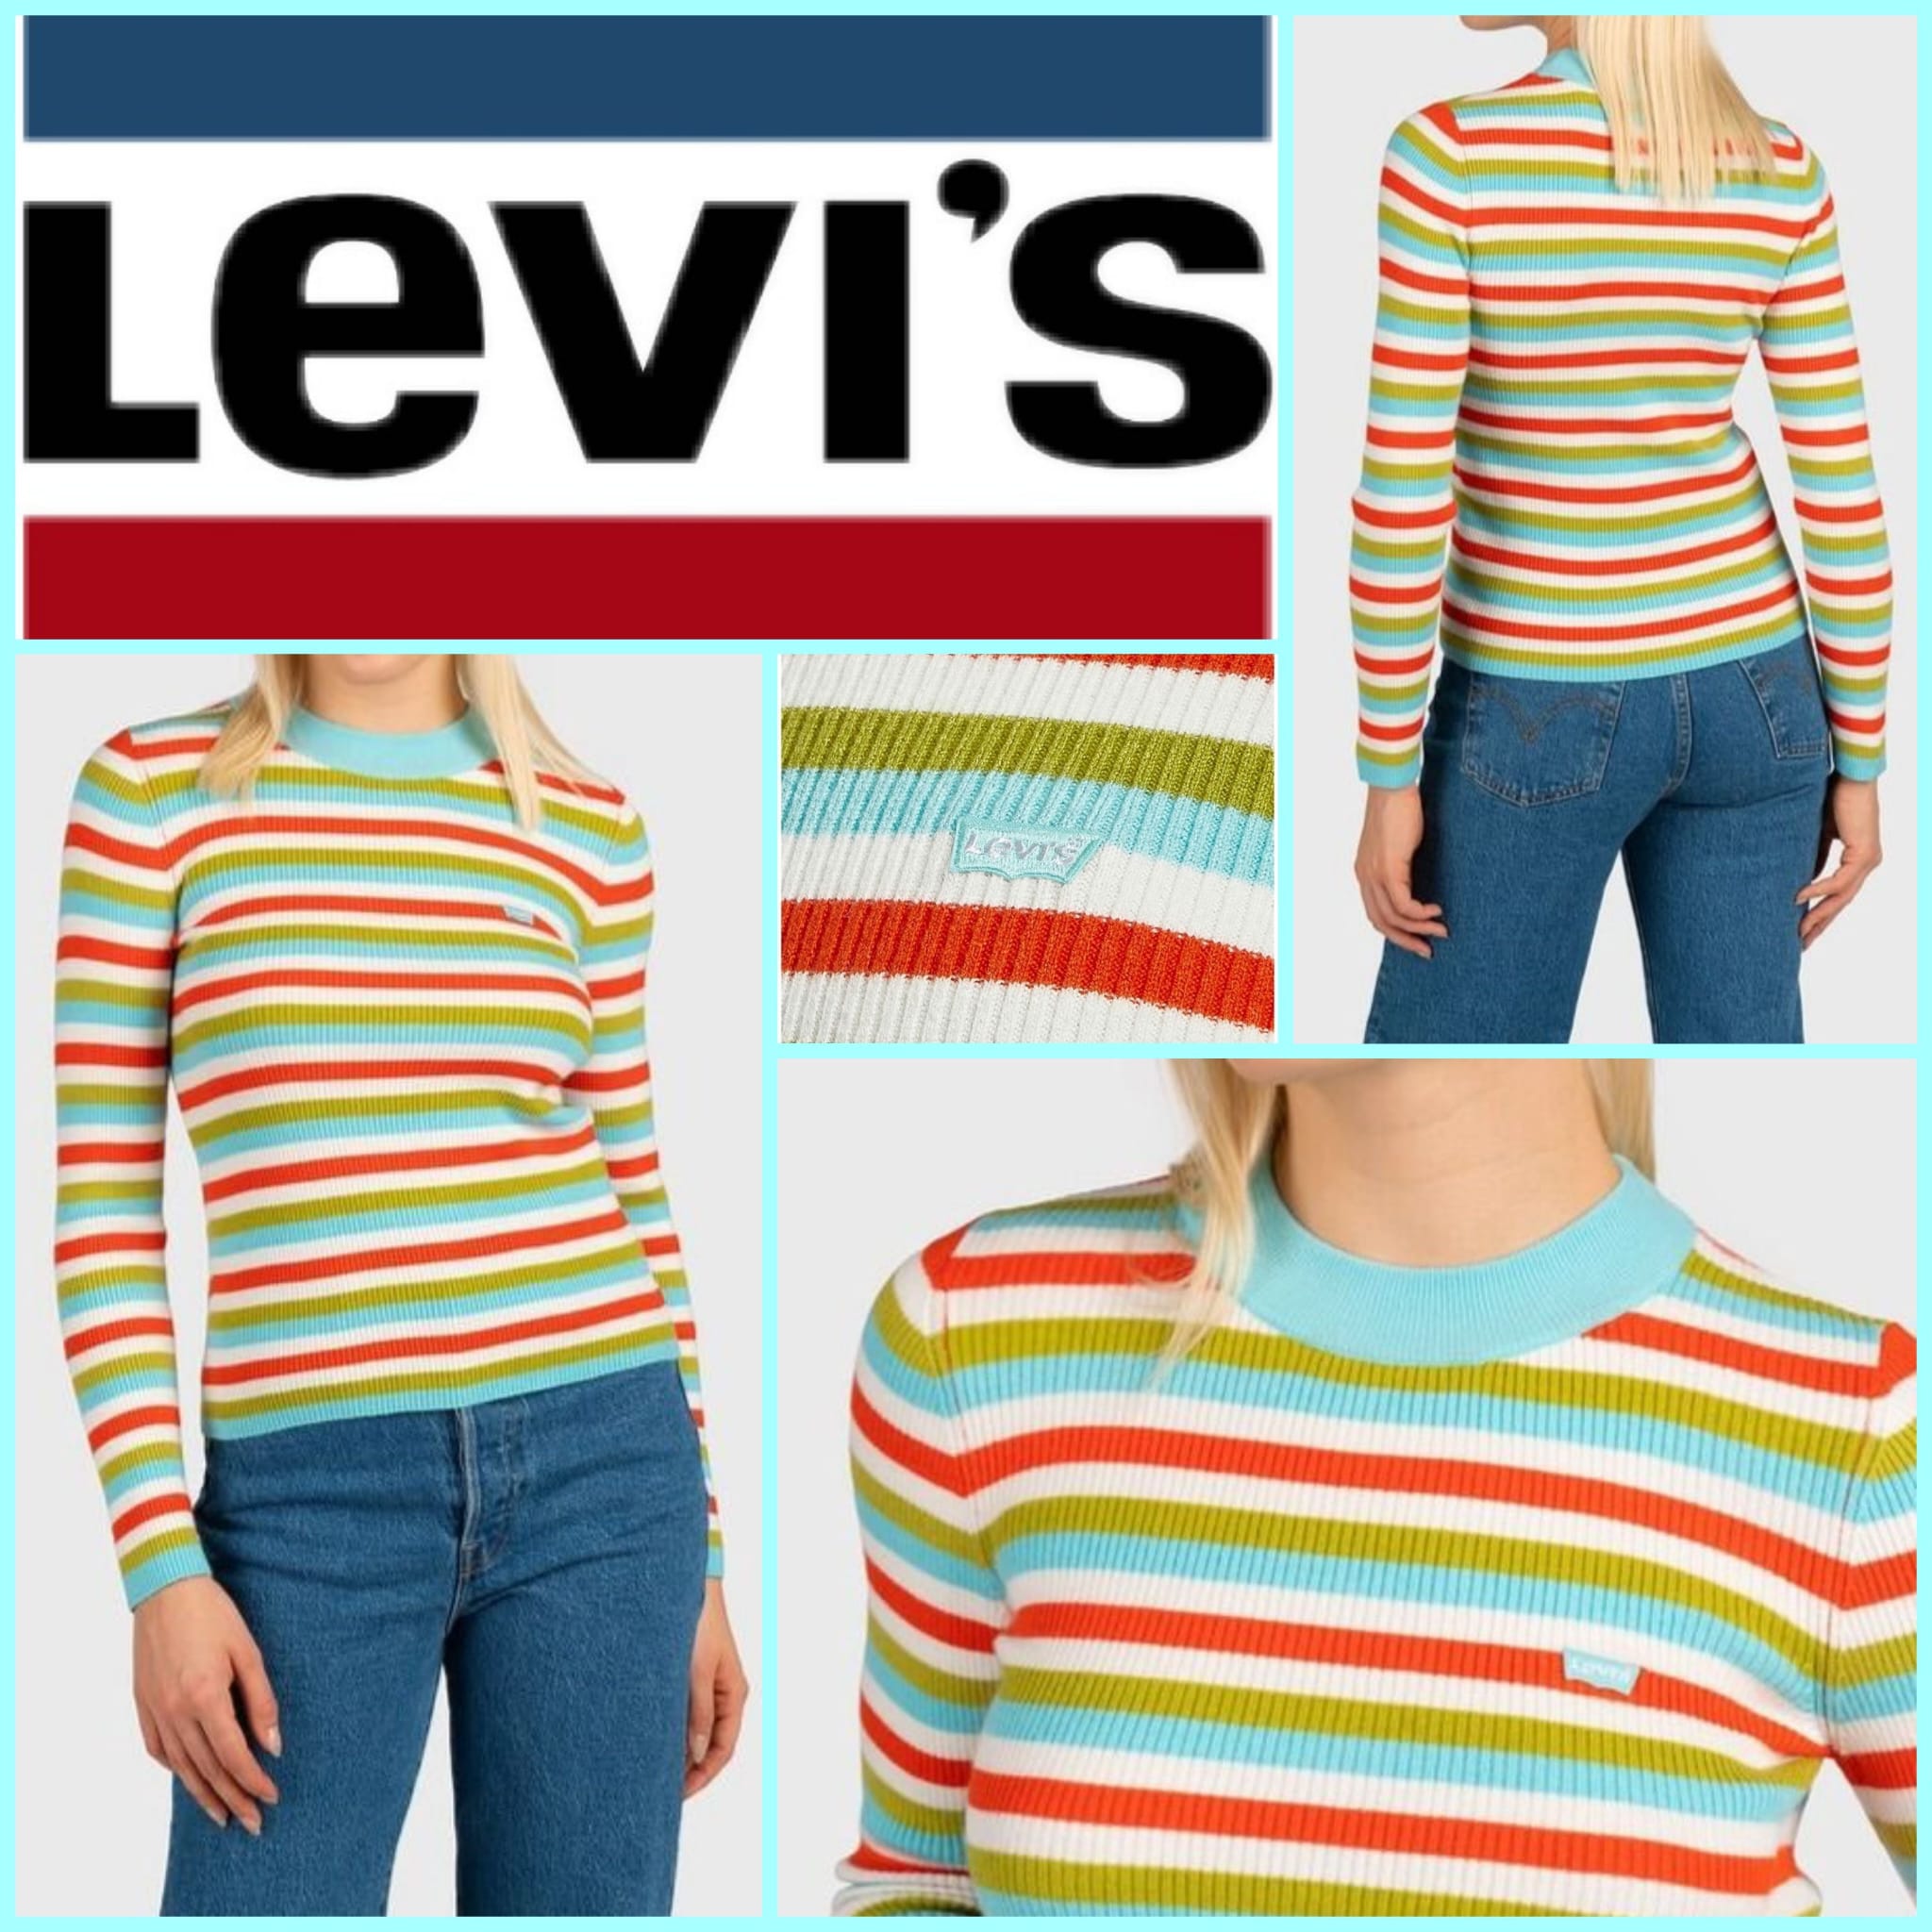 Women's pullover from Levi's